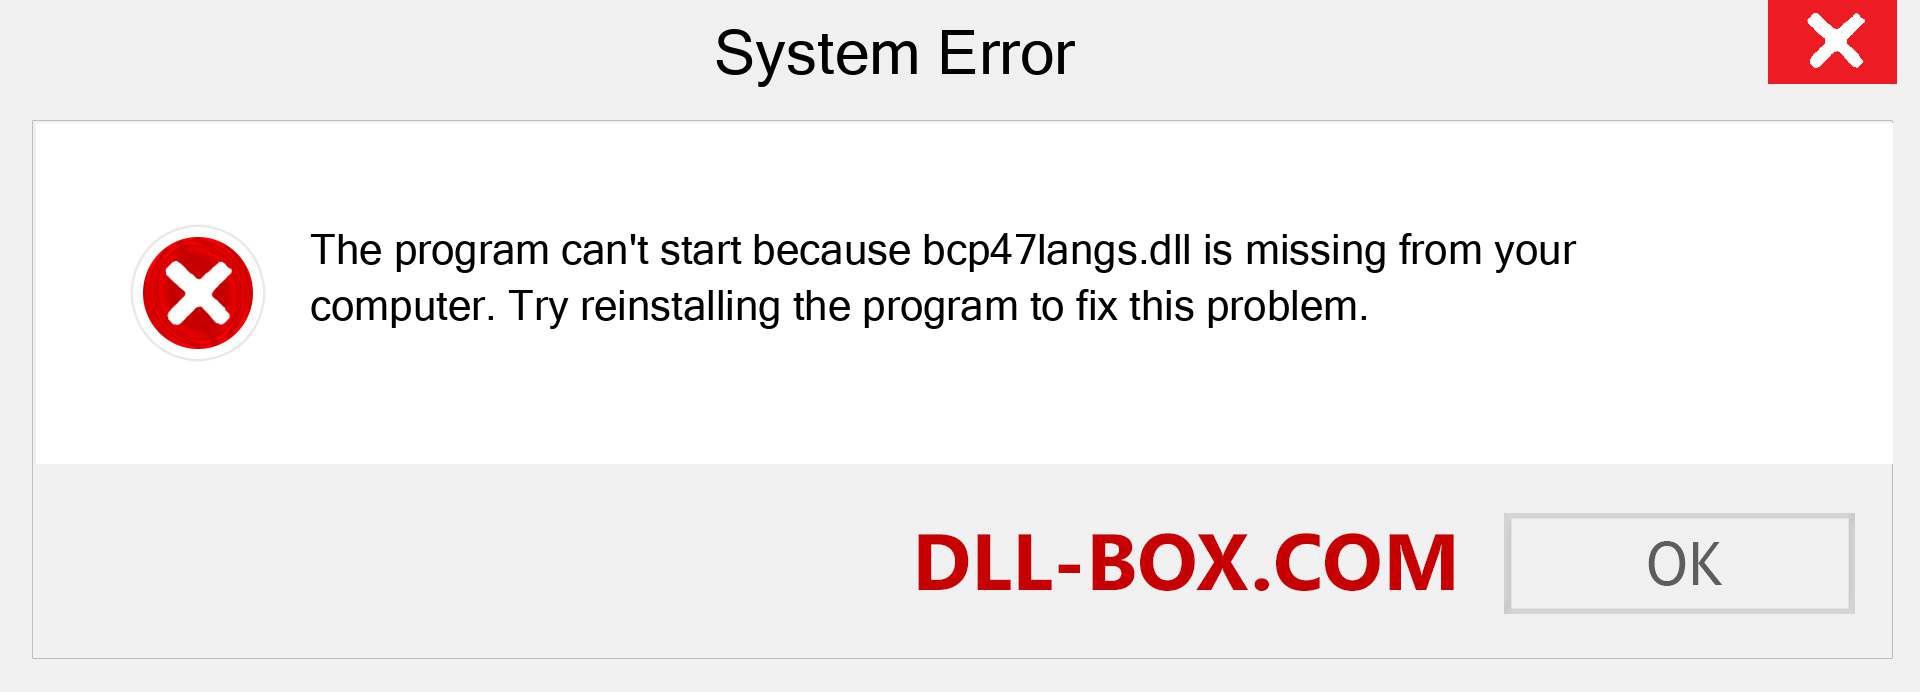  bcp47langs.dll file is missing?. Download for Windows 7, 8, 10 - Fix  bcp47langs dll Missing Error on Windows, photos, images